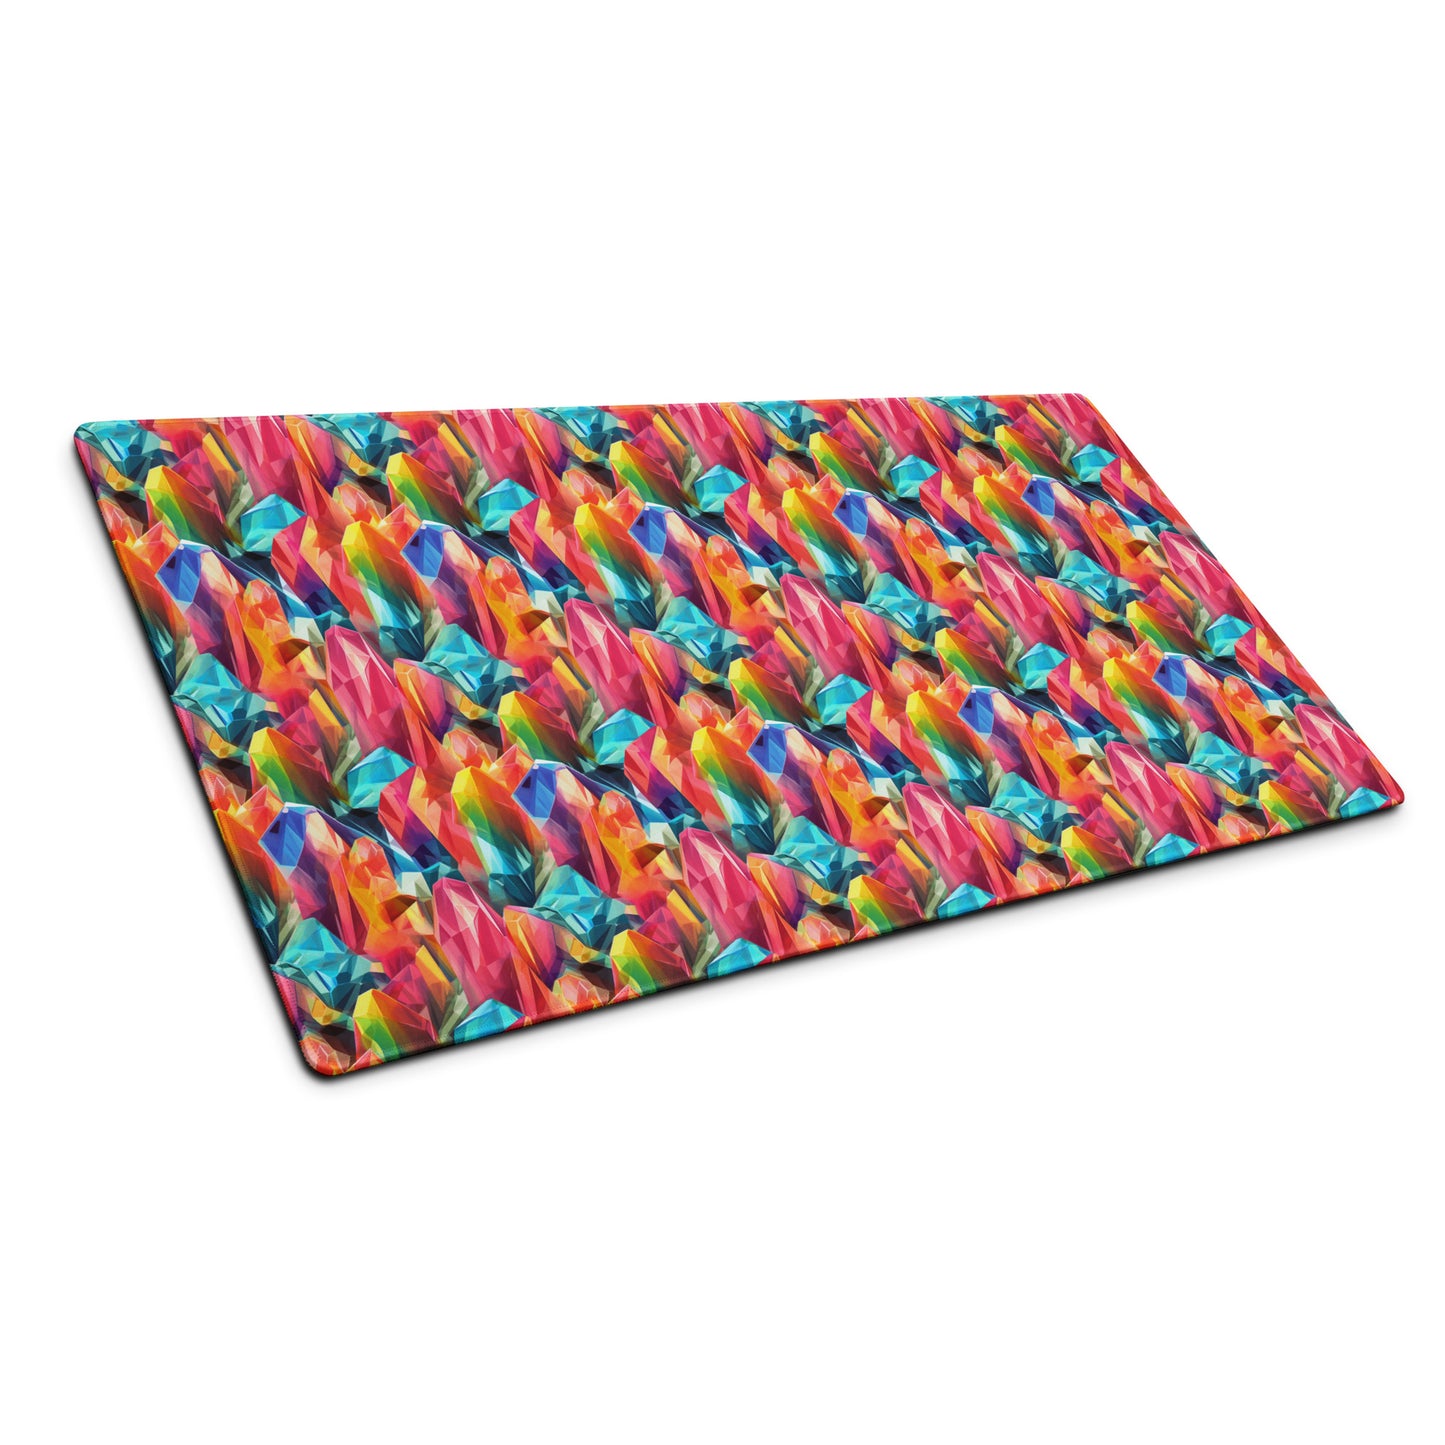 A 36" x 18" gaming desk pad with rainbow crystals sitting at an angle.